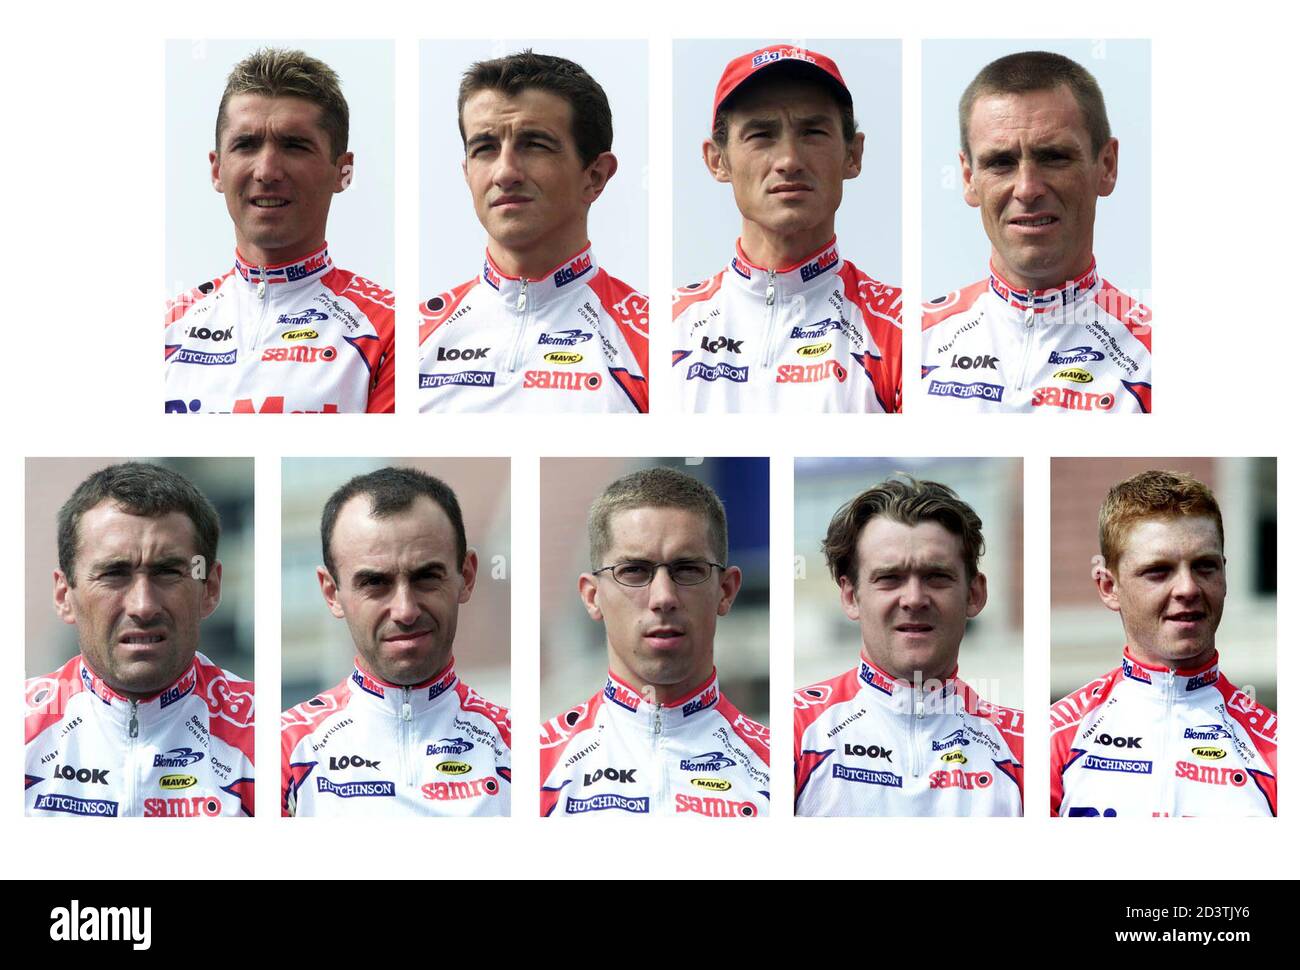 Aubert 93 cycling team members who are participating in the 2001 Tour de  France cycling race. Top row L-R: Stephane Heulot of France, Guillaume  Auger of France, Ludovic Auger of France, Chritophe